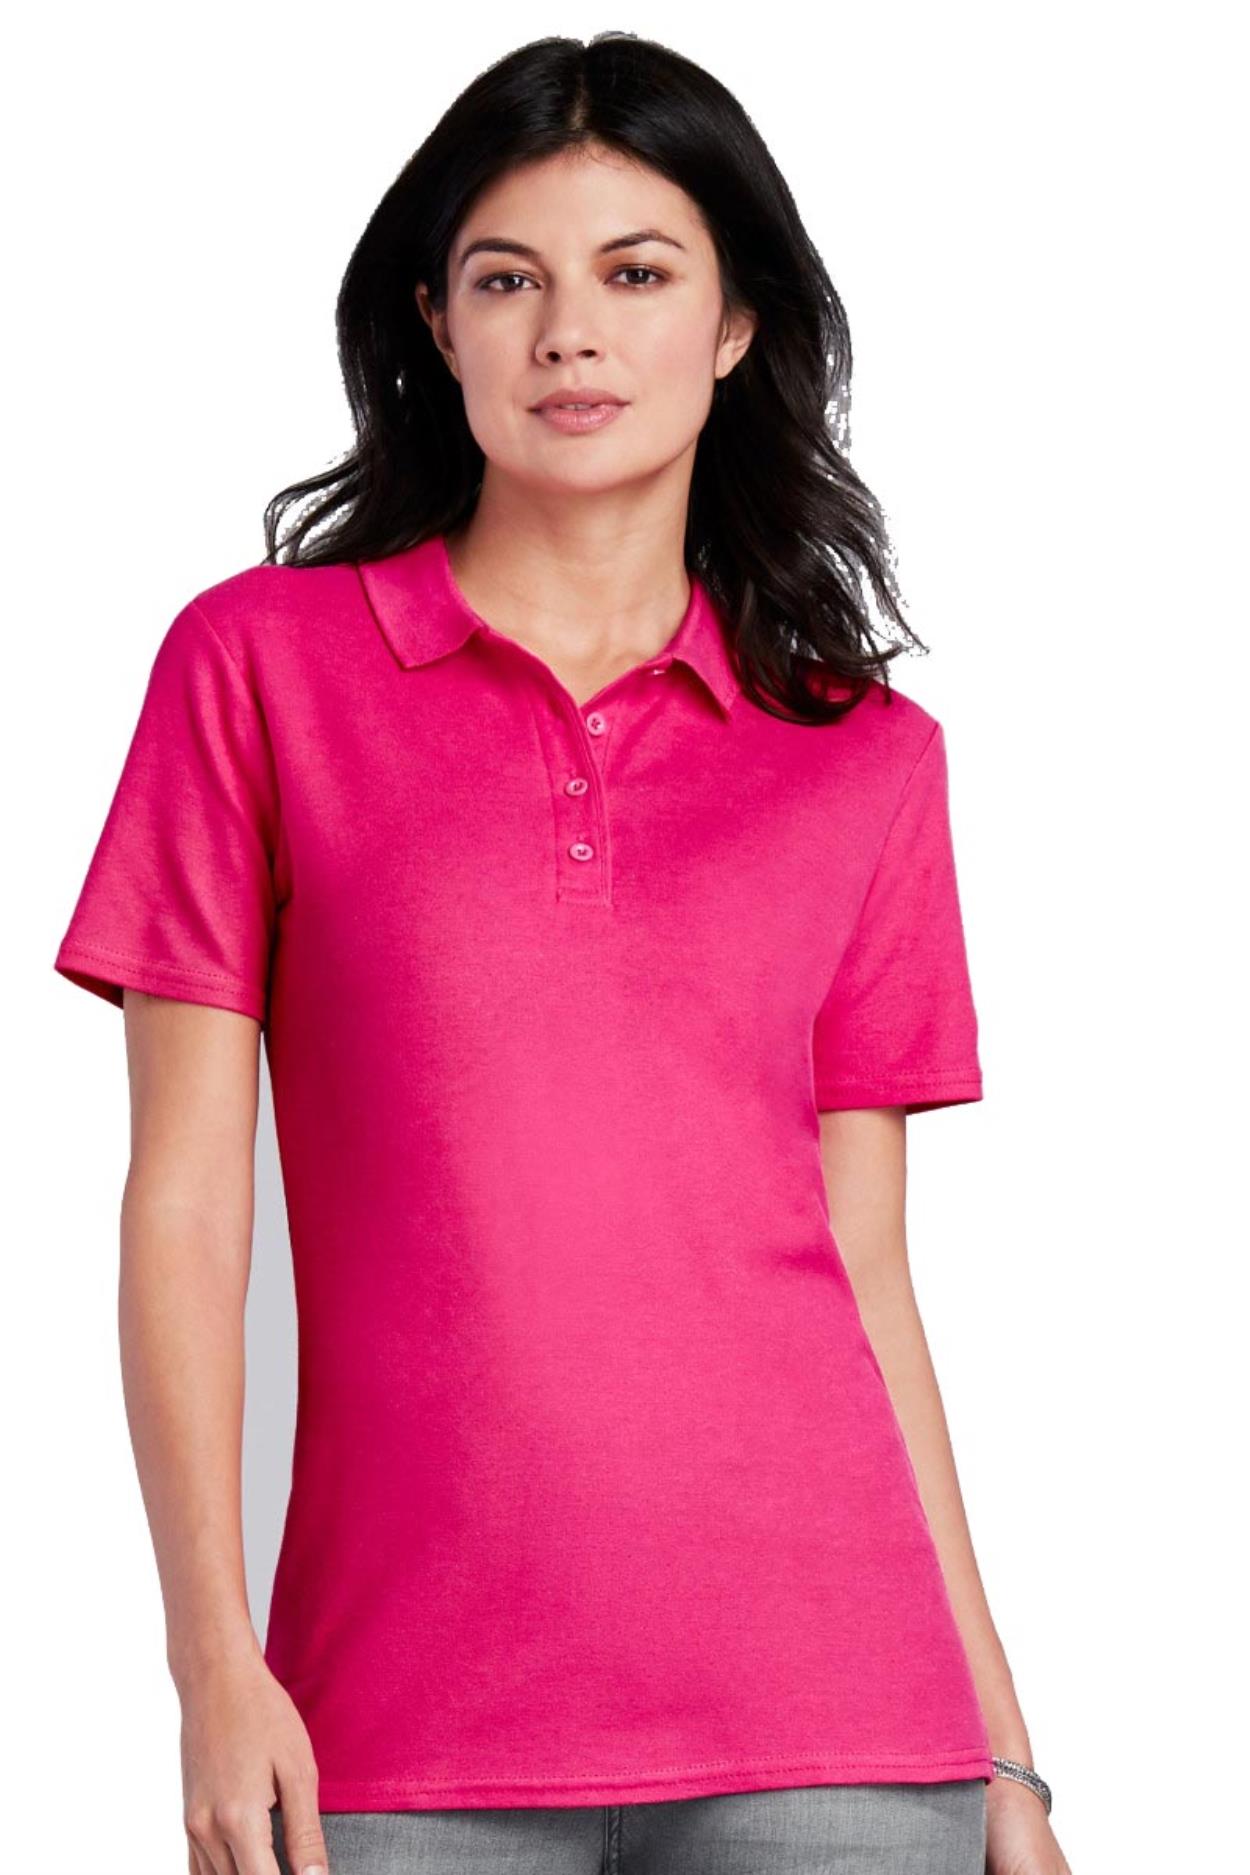 GD75 64800L Softstyle Ladies' Double Pique Polo Image 1